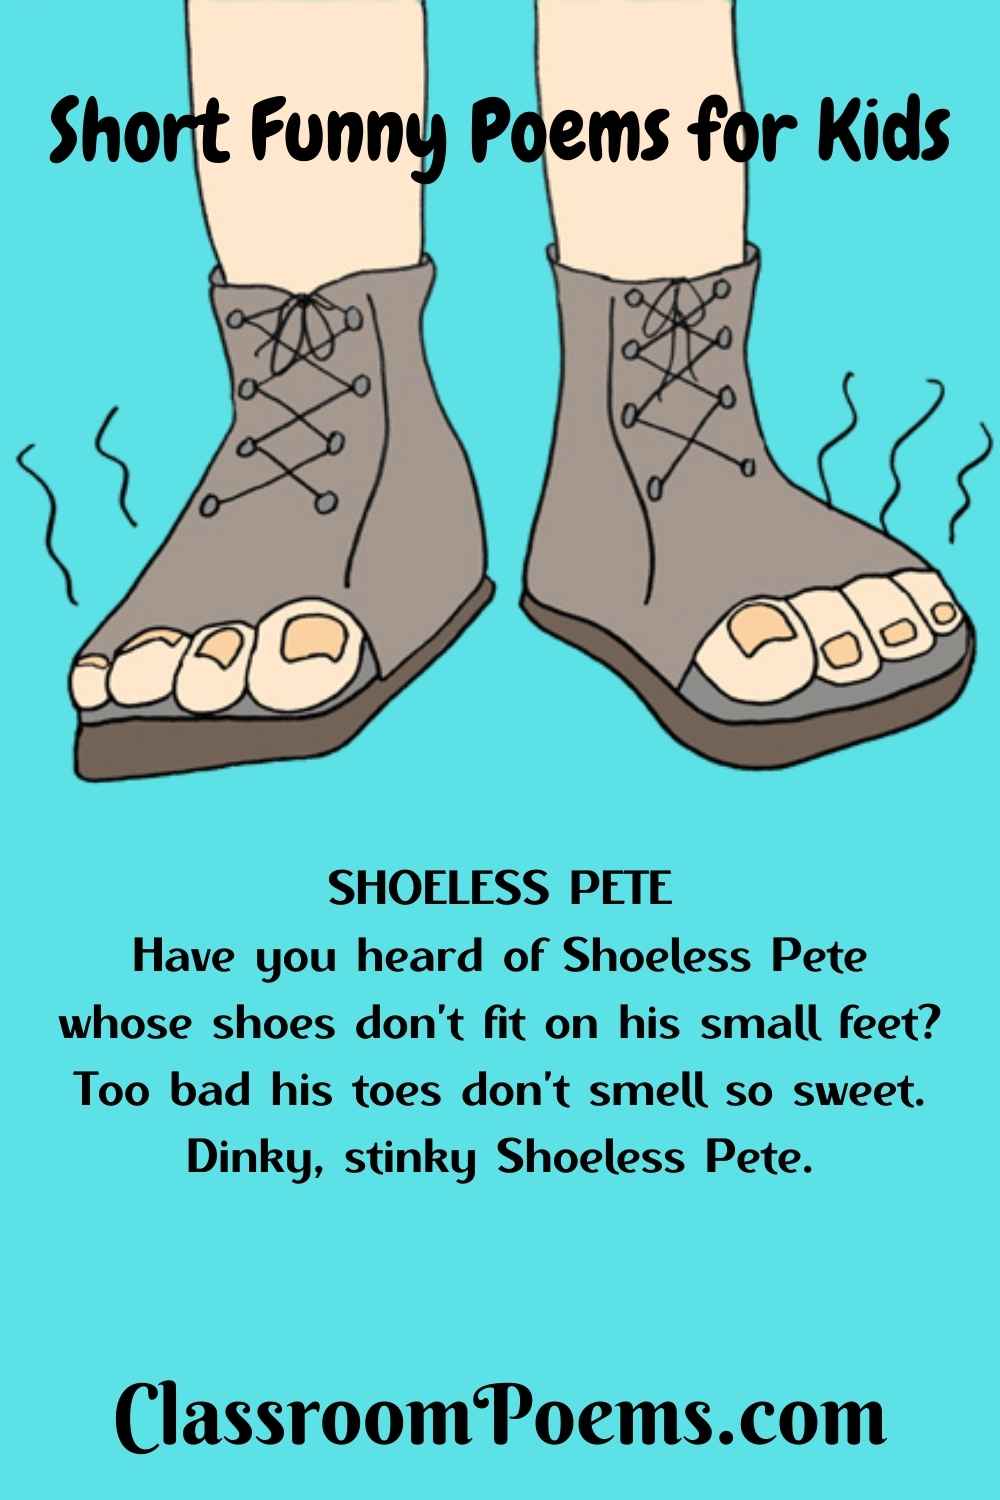 Toeless shoes cartoon. STINKY PETE a funny short poem by Denise Rodgers on ClassroomPoems.com.